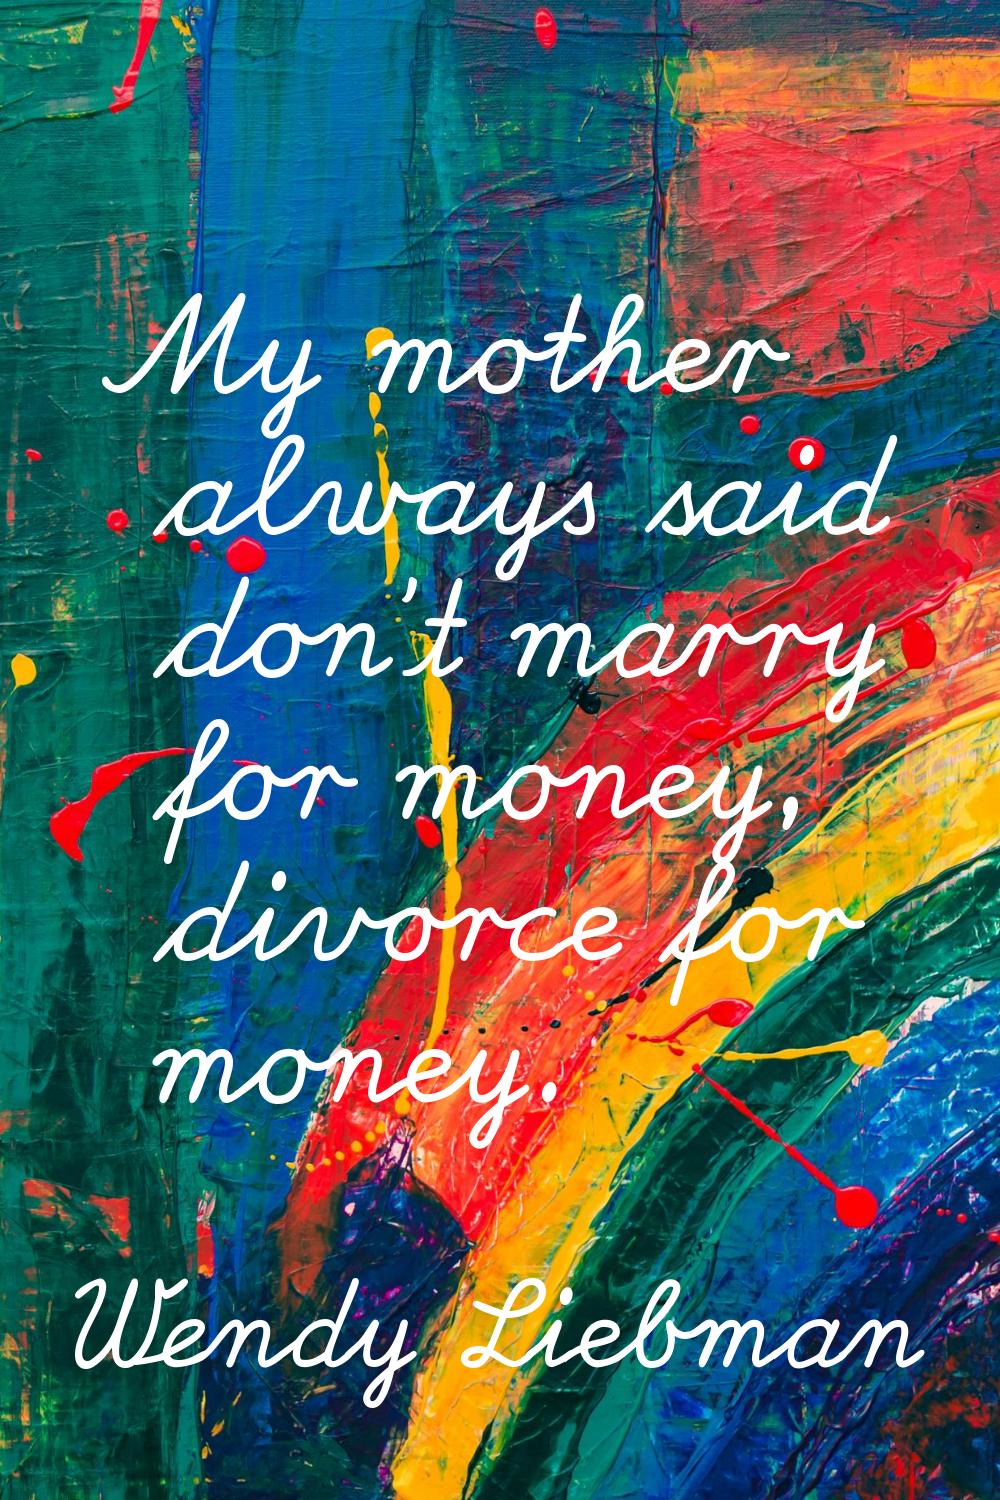 My mother always said don't marry for money, divorce for money.